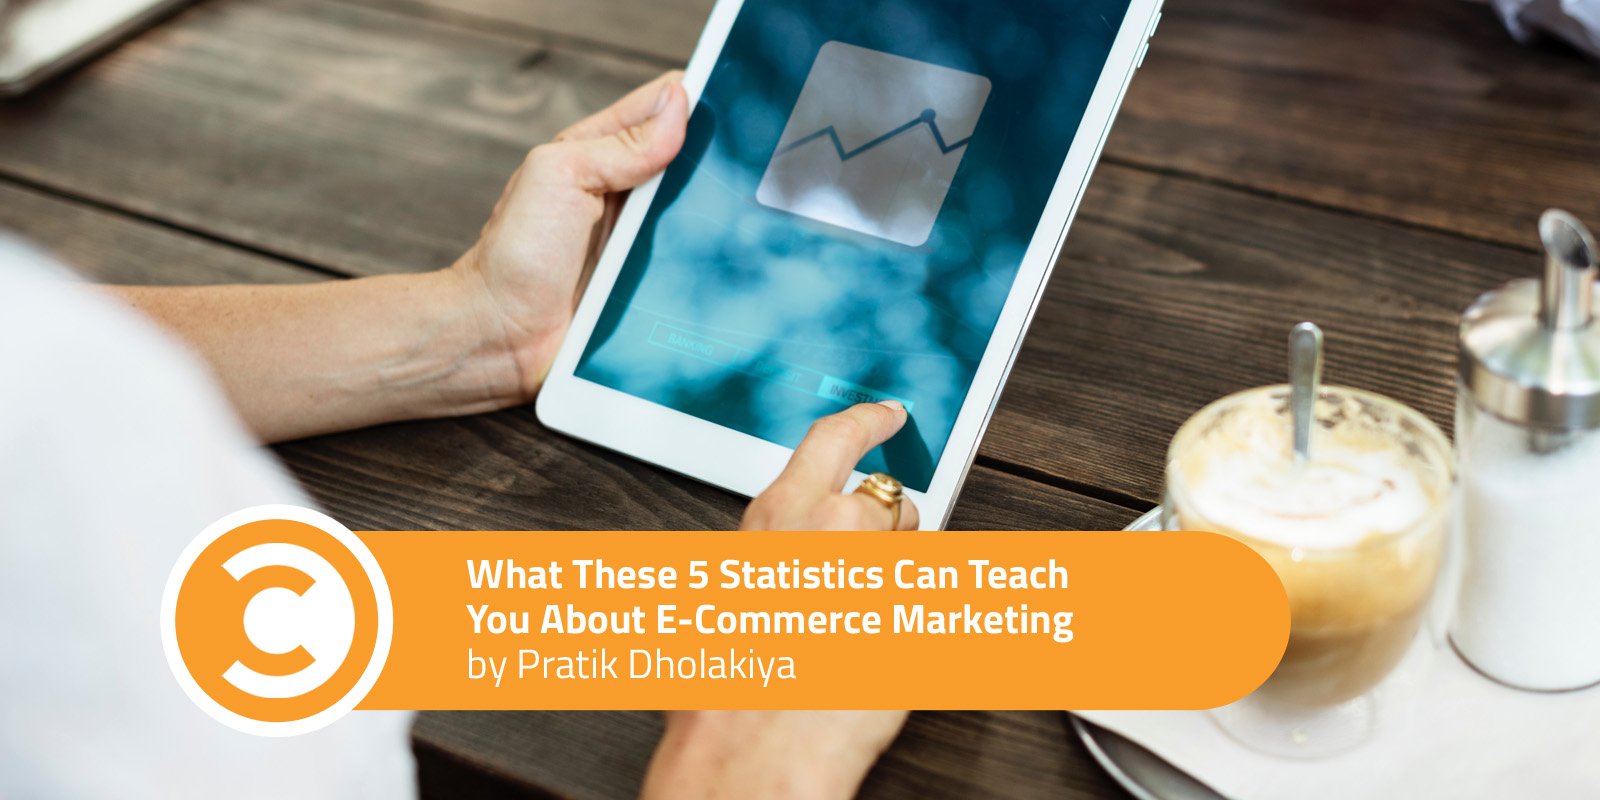 What These 5 Statistics Can Teach You About E-Commerce Marketing